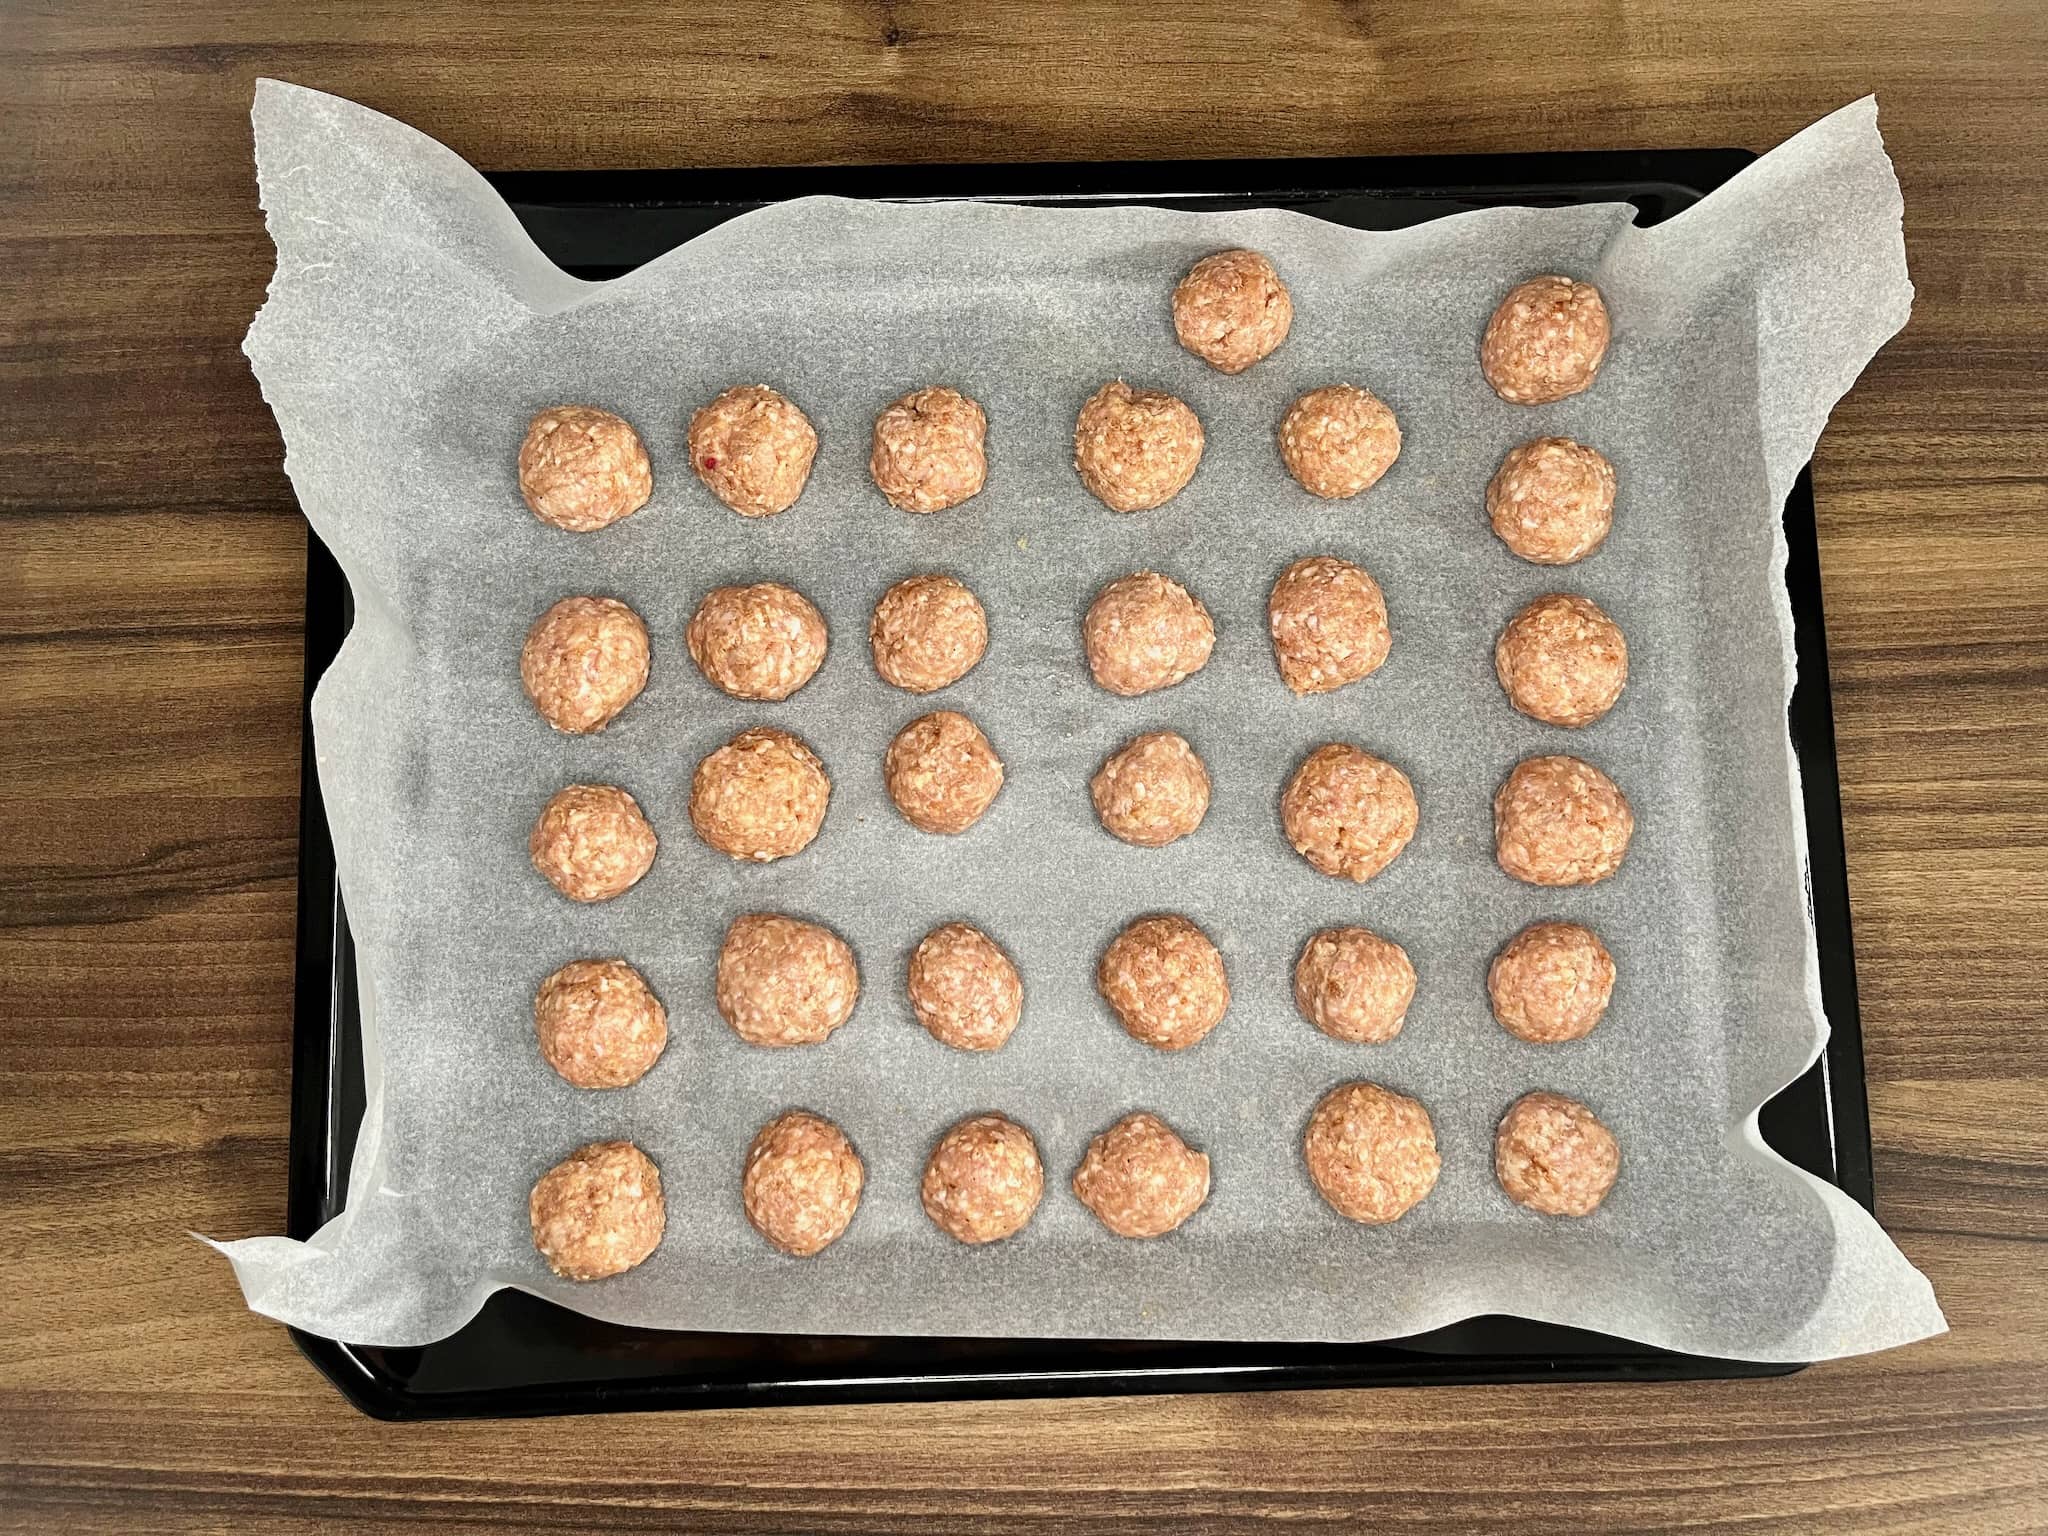 A large baking tray holds formed pork mince balls, ready to be baked in the oven.